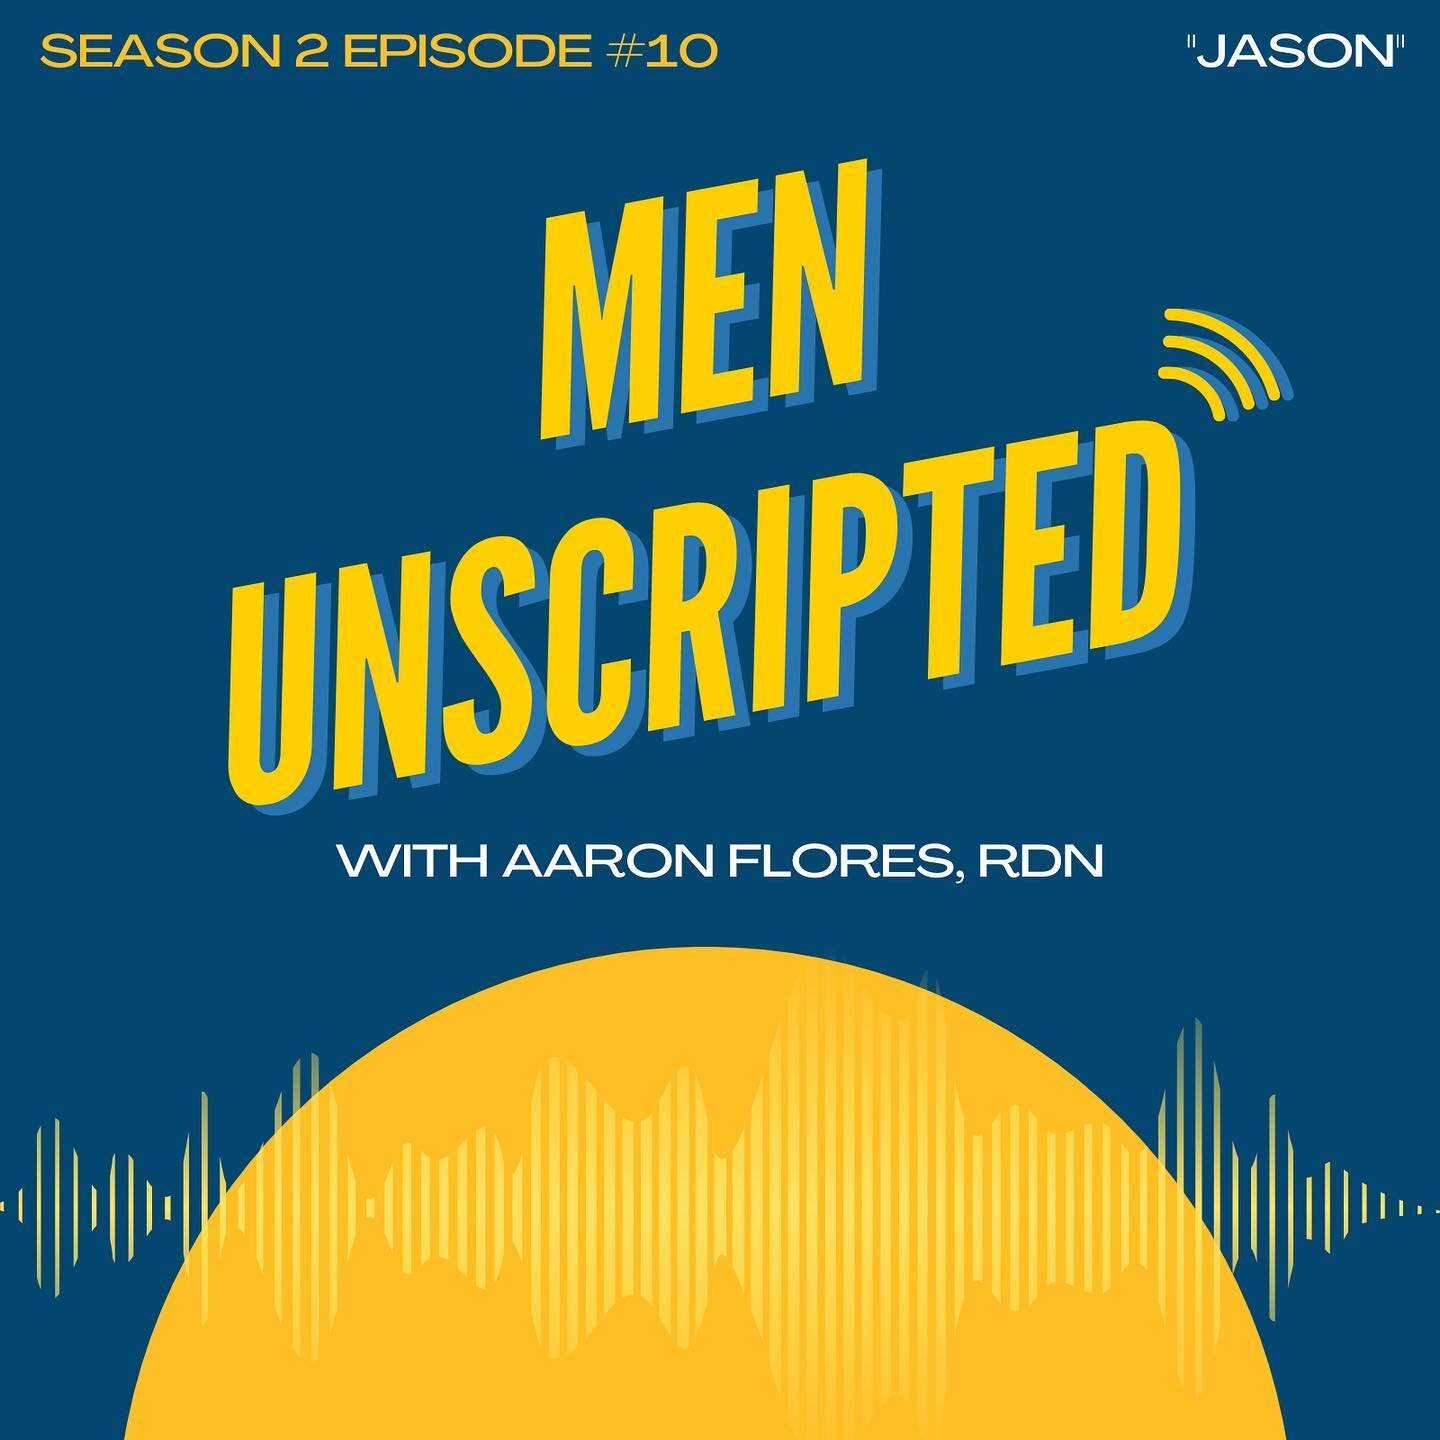 Season 2 Episode 10 -&ldquo;Jason&rdquo; The finale to Season 10 is here!  I&rsquo;m so thankful &ldquo;Jason&rdquo; came forward to share his story.  Being a man of faith and from the South, his experience of having an eating disorder is one that ma